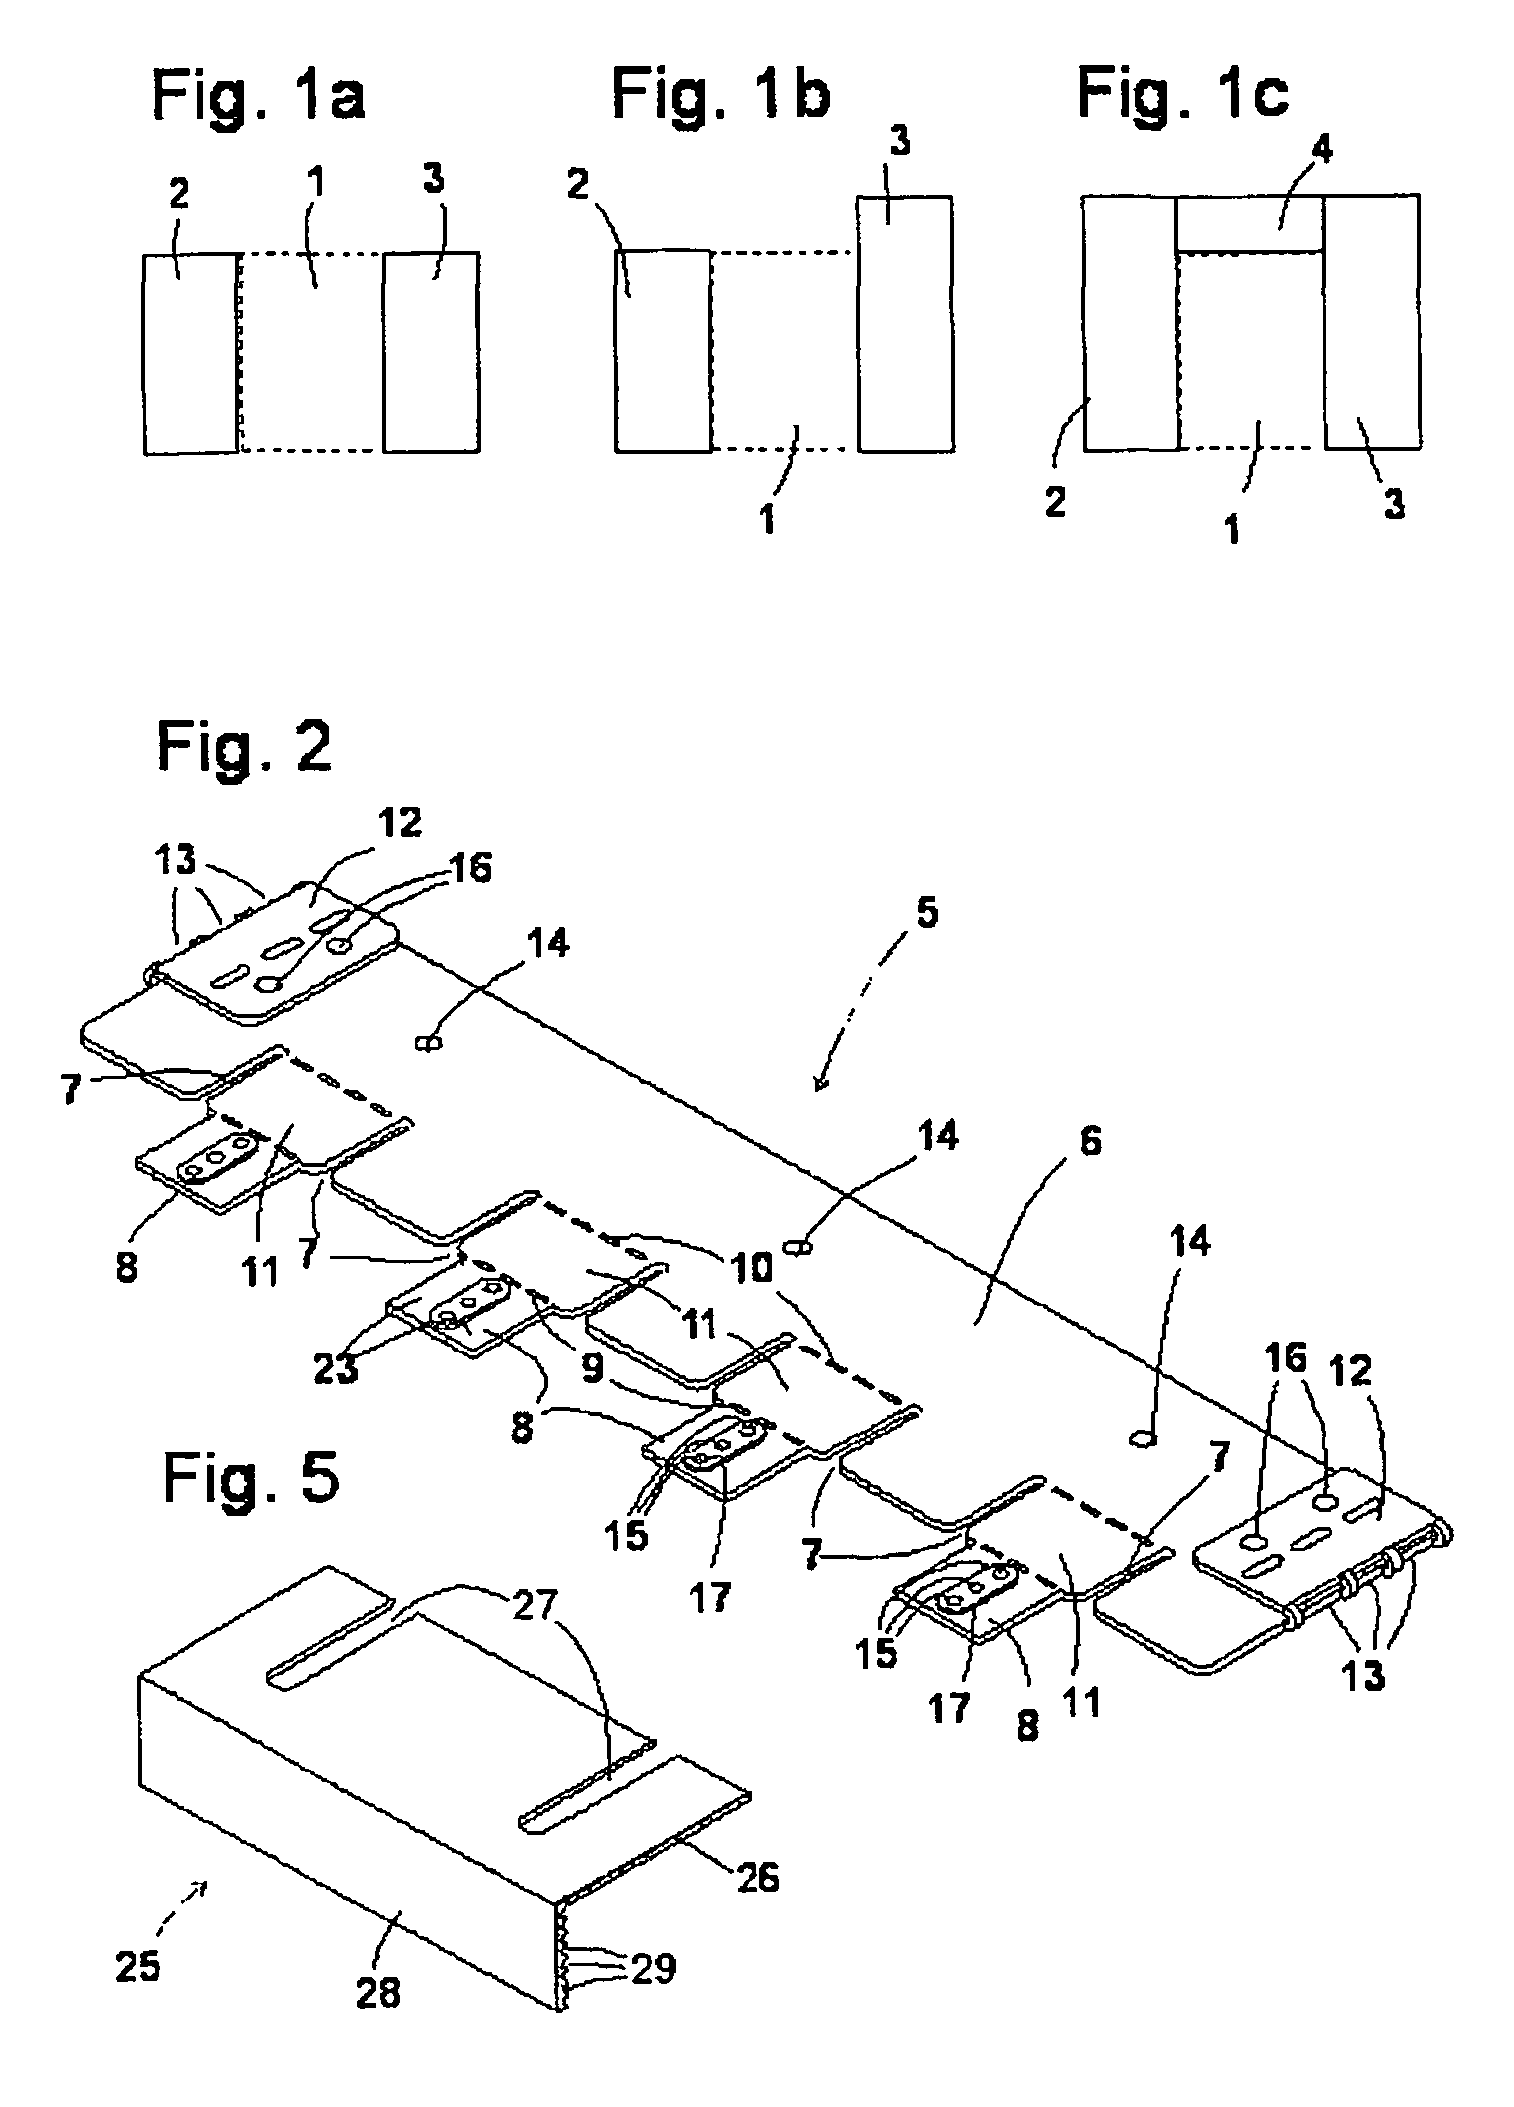 Housing for a household appliance